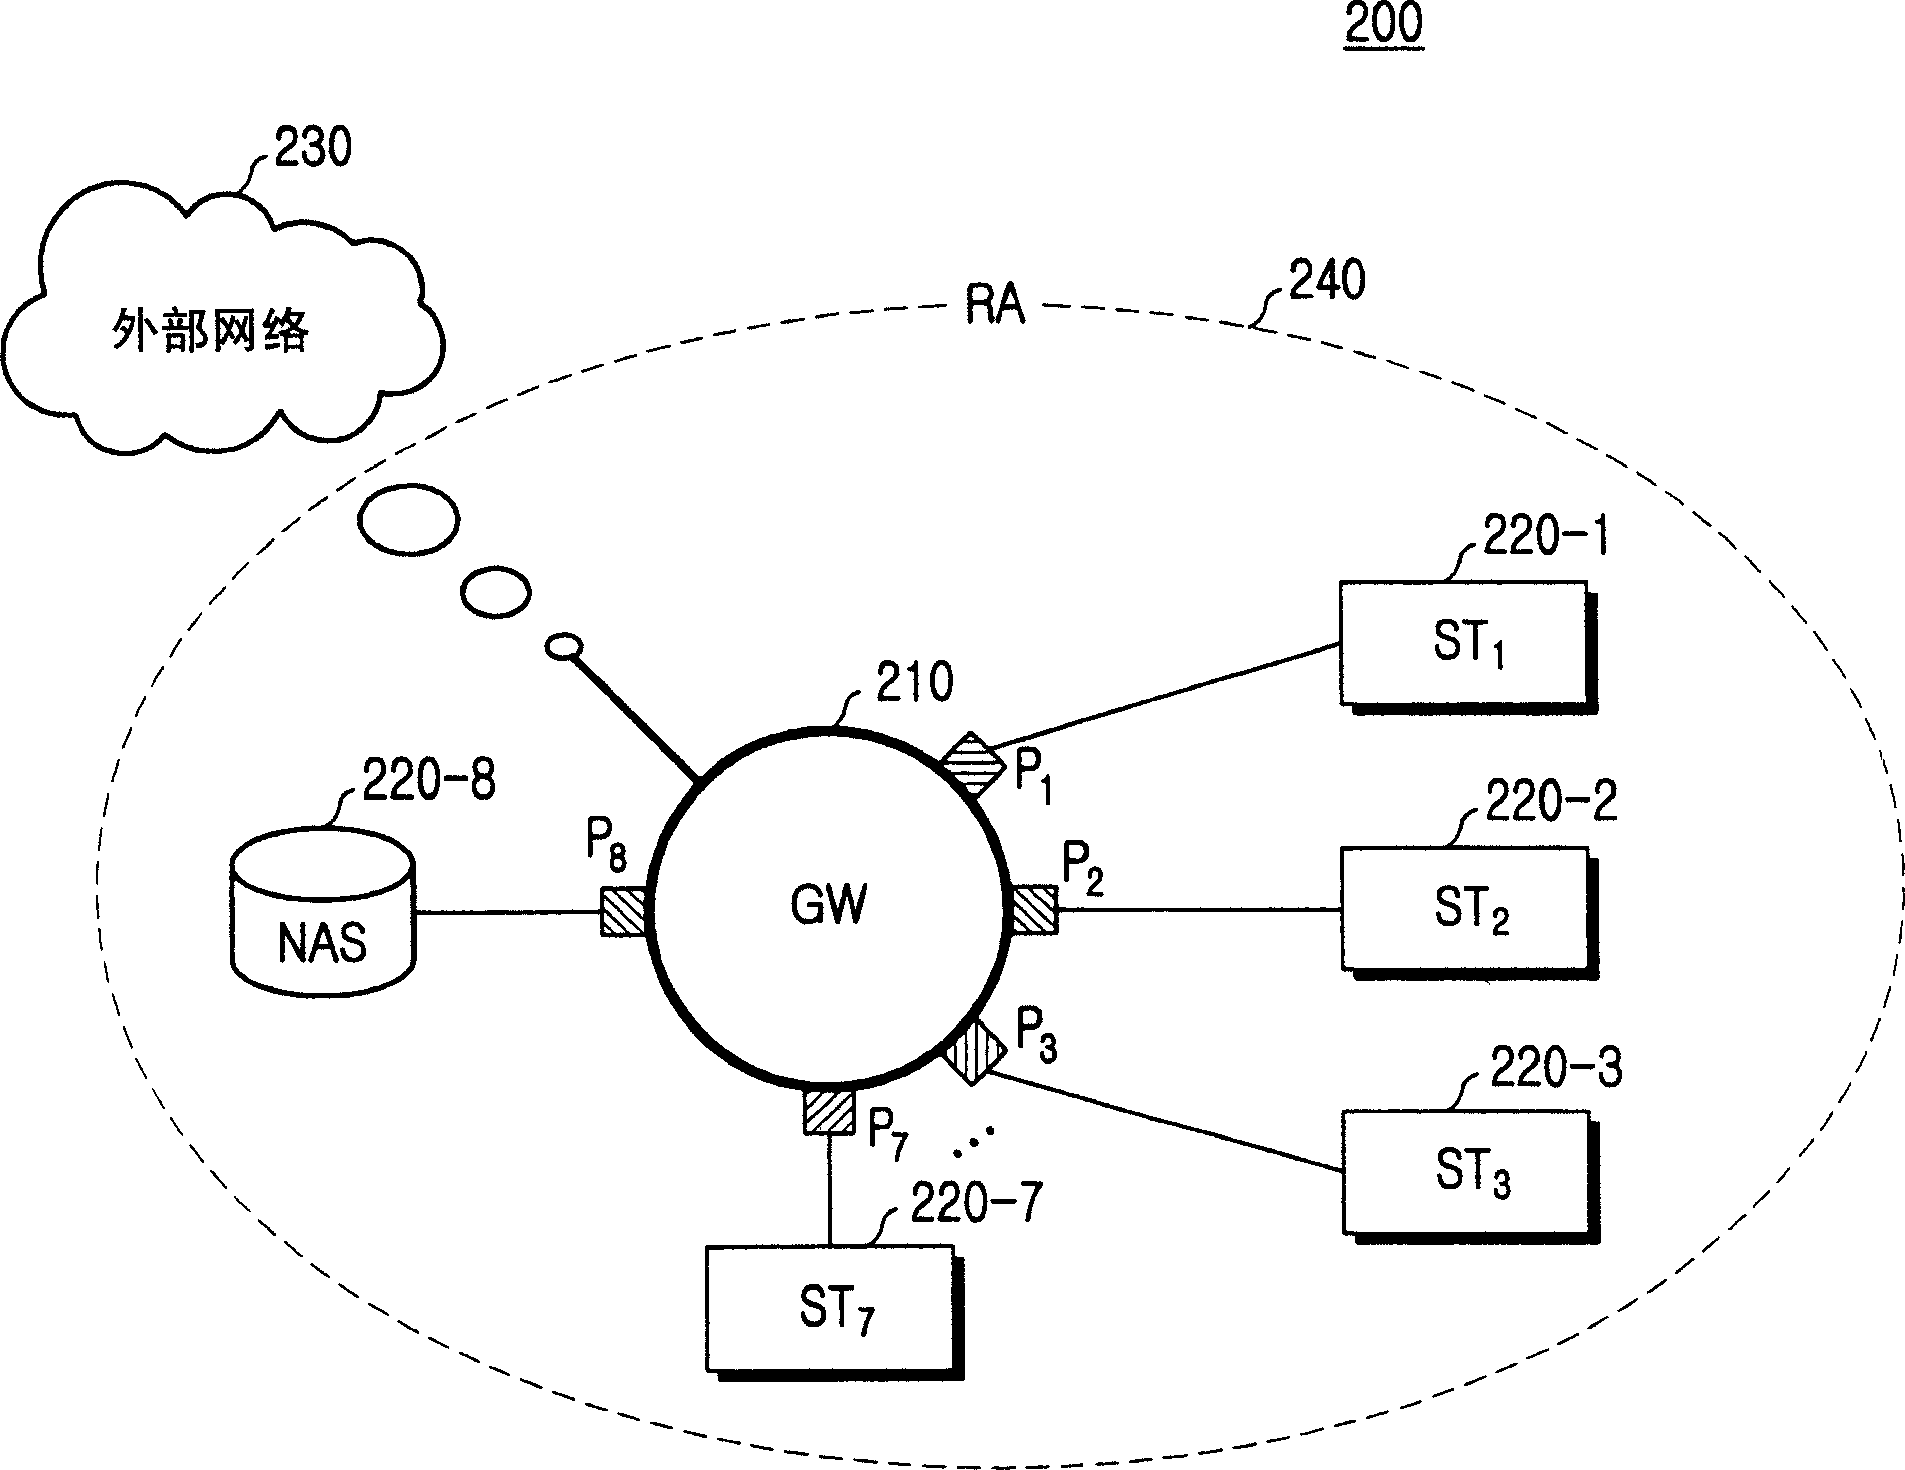 Time allocation method for synchronous Ethernet network